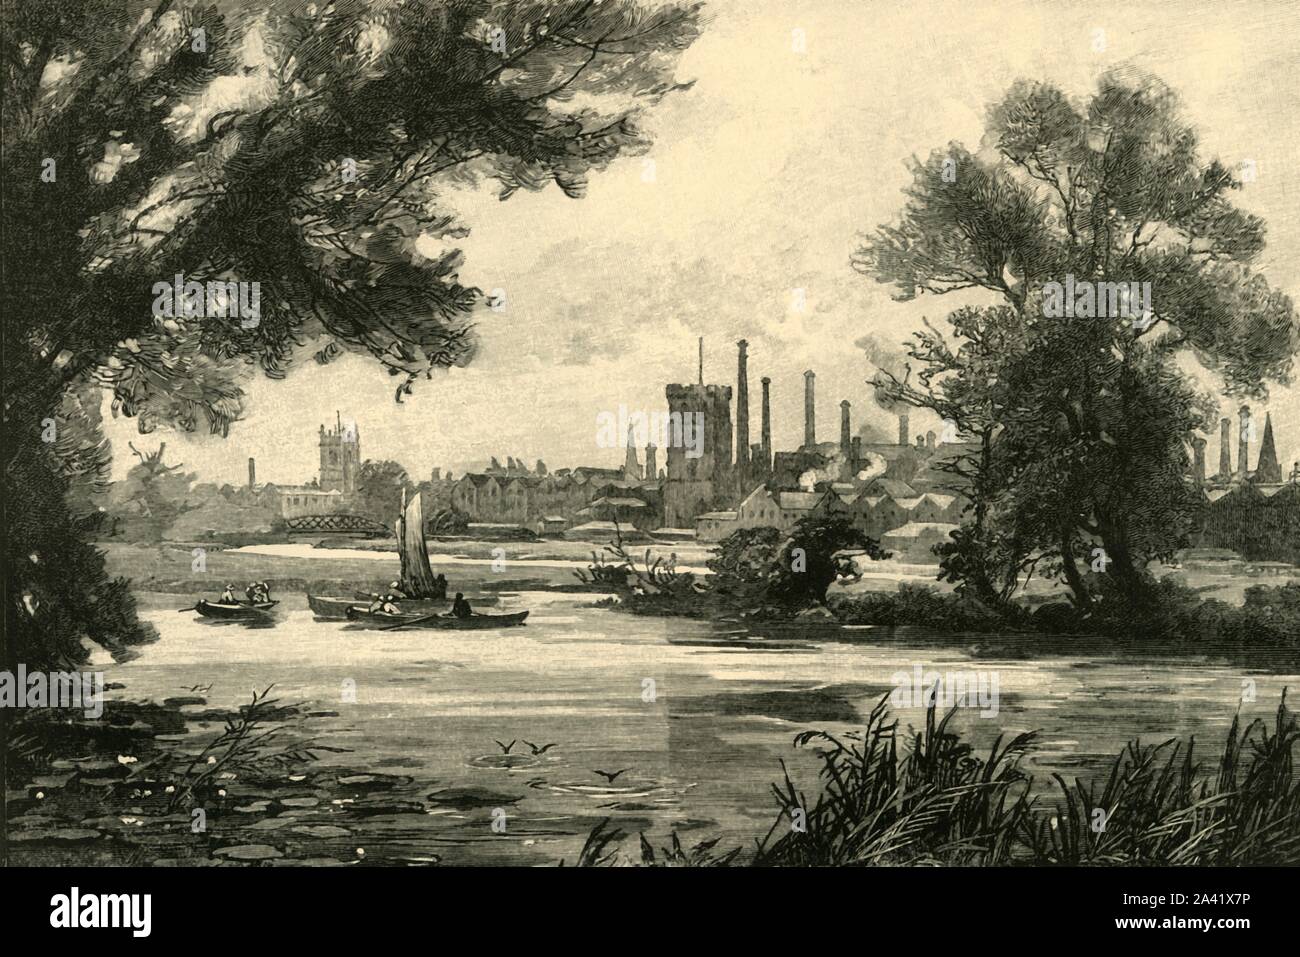 'Burton-On-Trent', 1898. Industrialised market town on the River Trent in Staffordshire, known for brewing. The town originally grew around Burton Abbey. From &quot;Our Own Country, Volume VI&quot;. [Cassell and Company, Limited, London, Paris &amp; Melbourne, 1898] Stock Photo